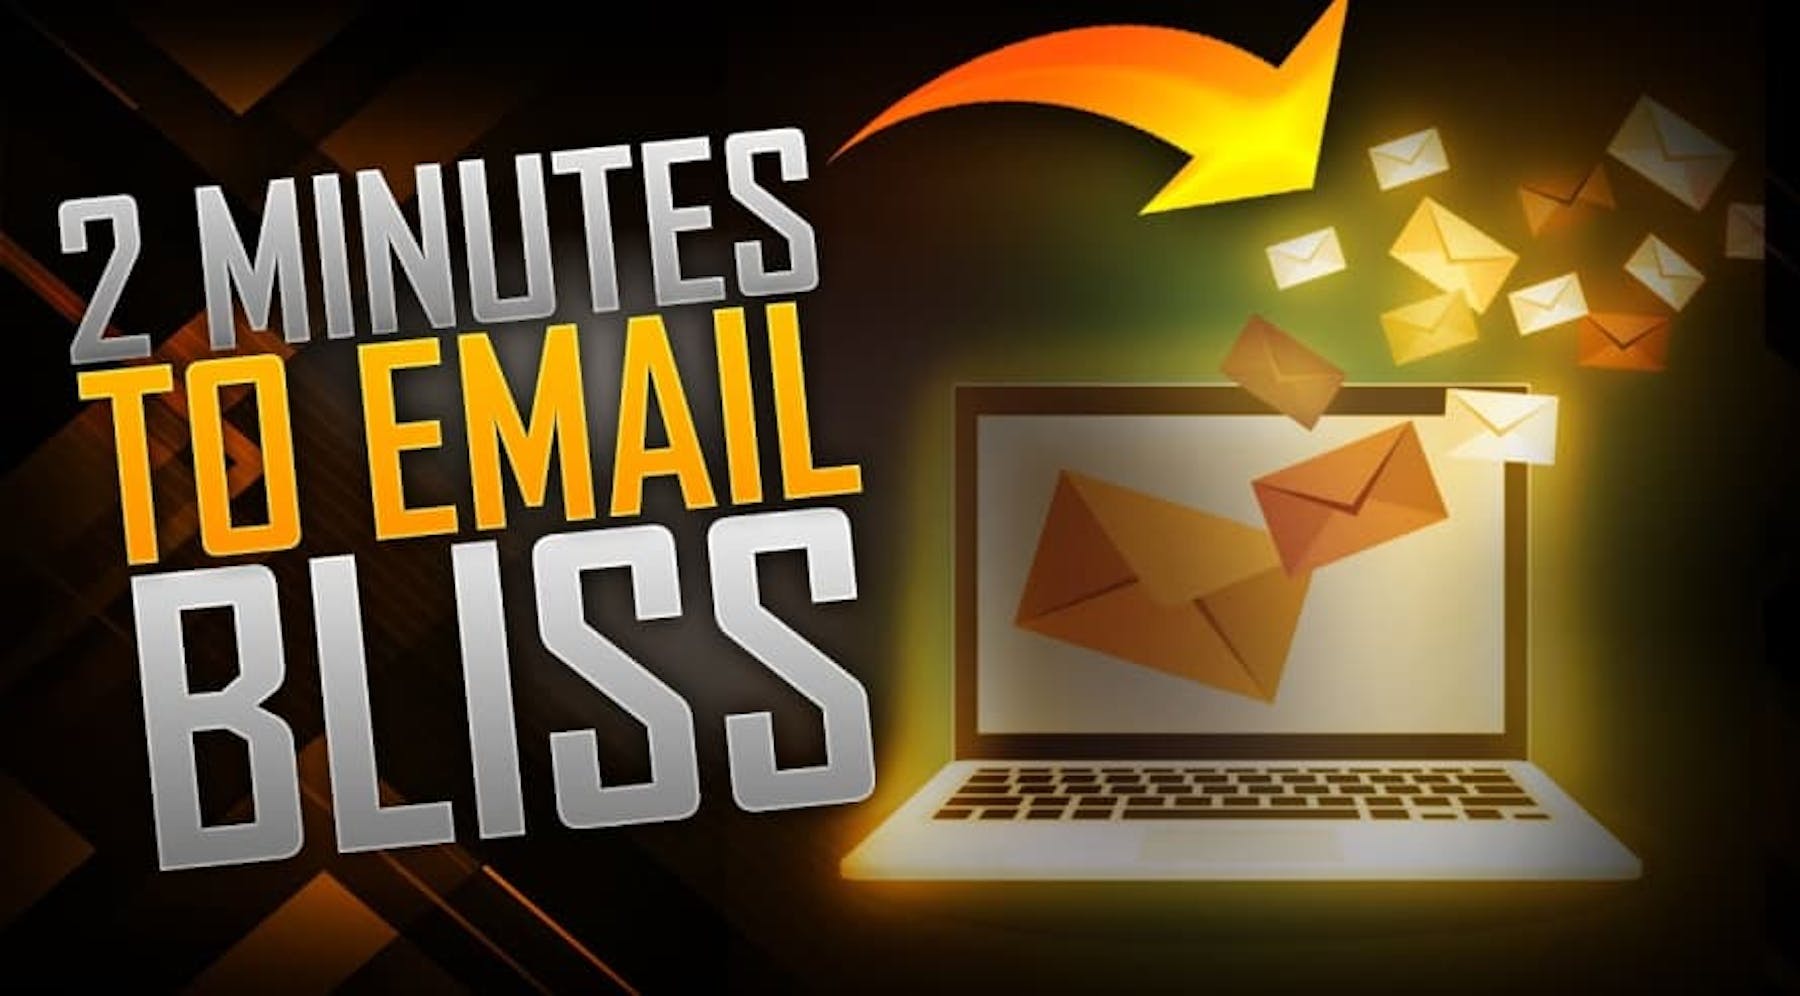 2 minutes to email bliss